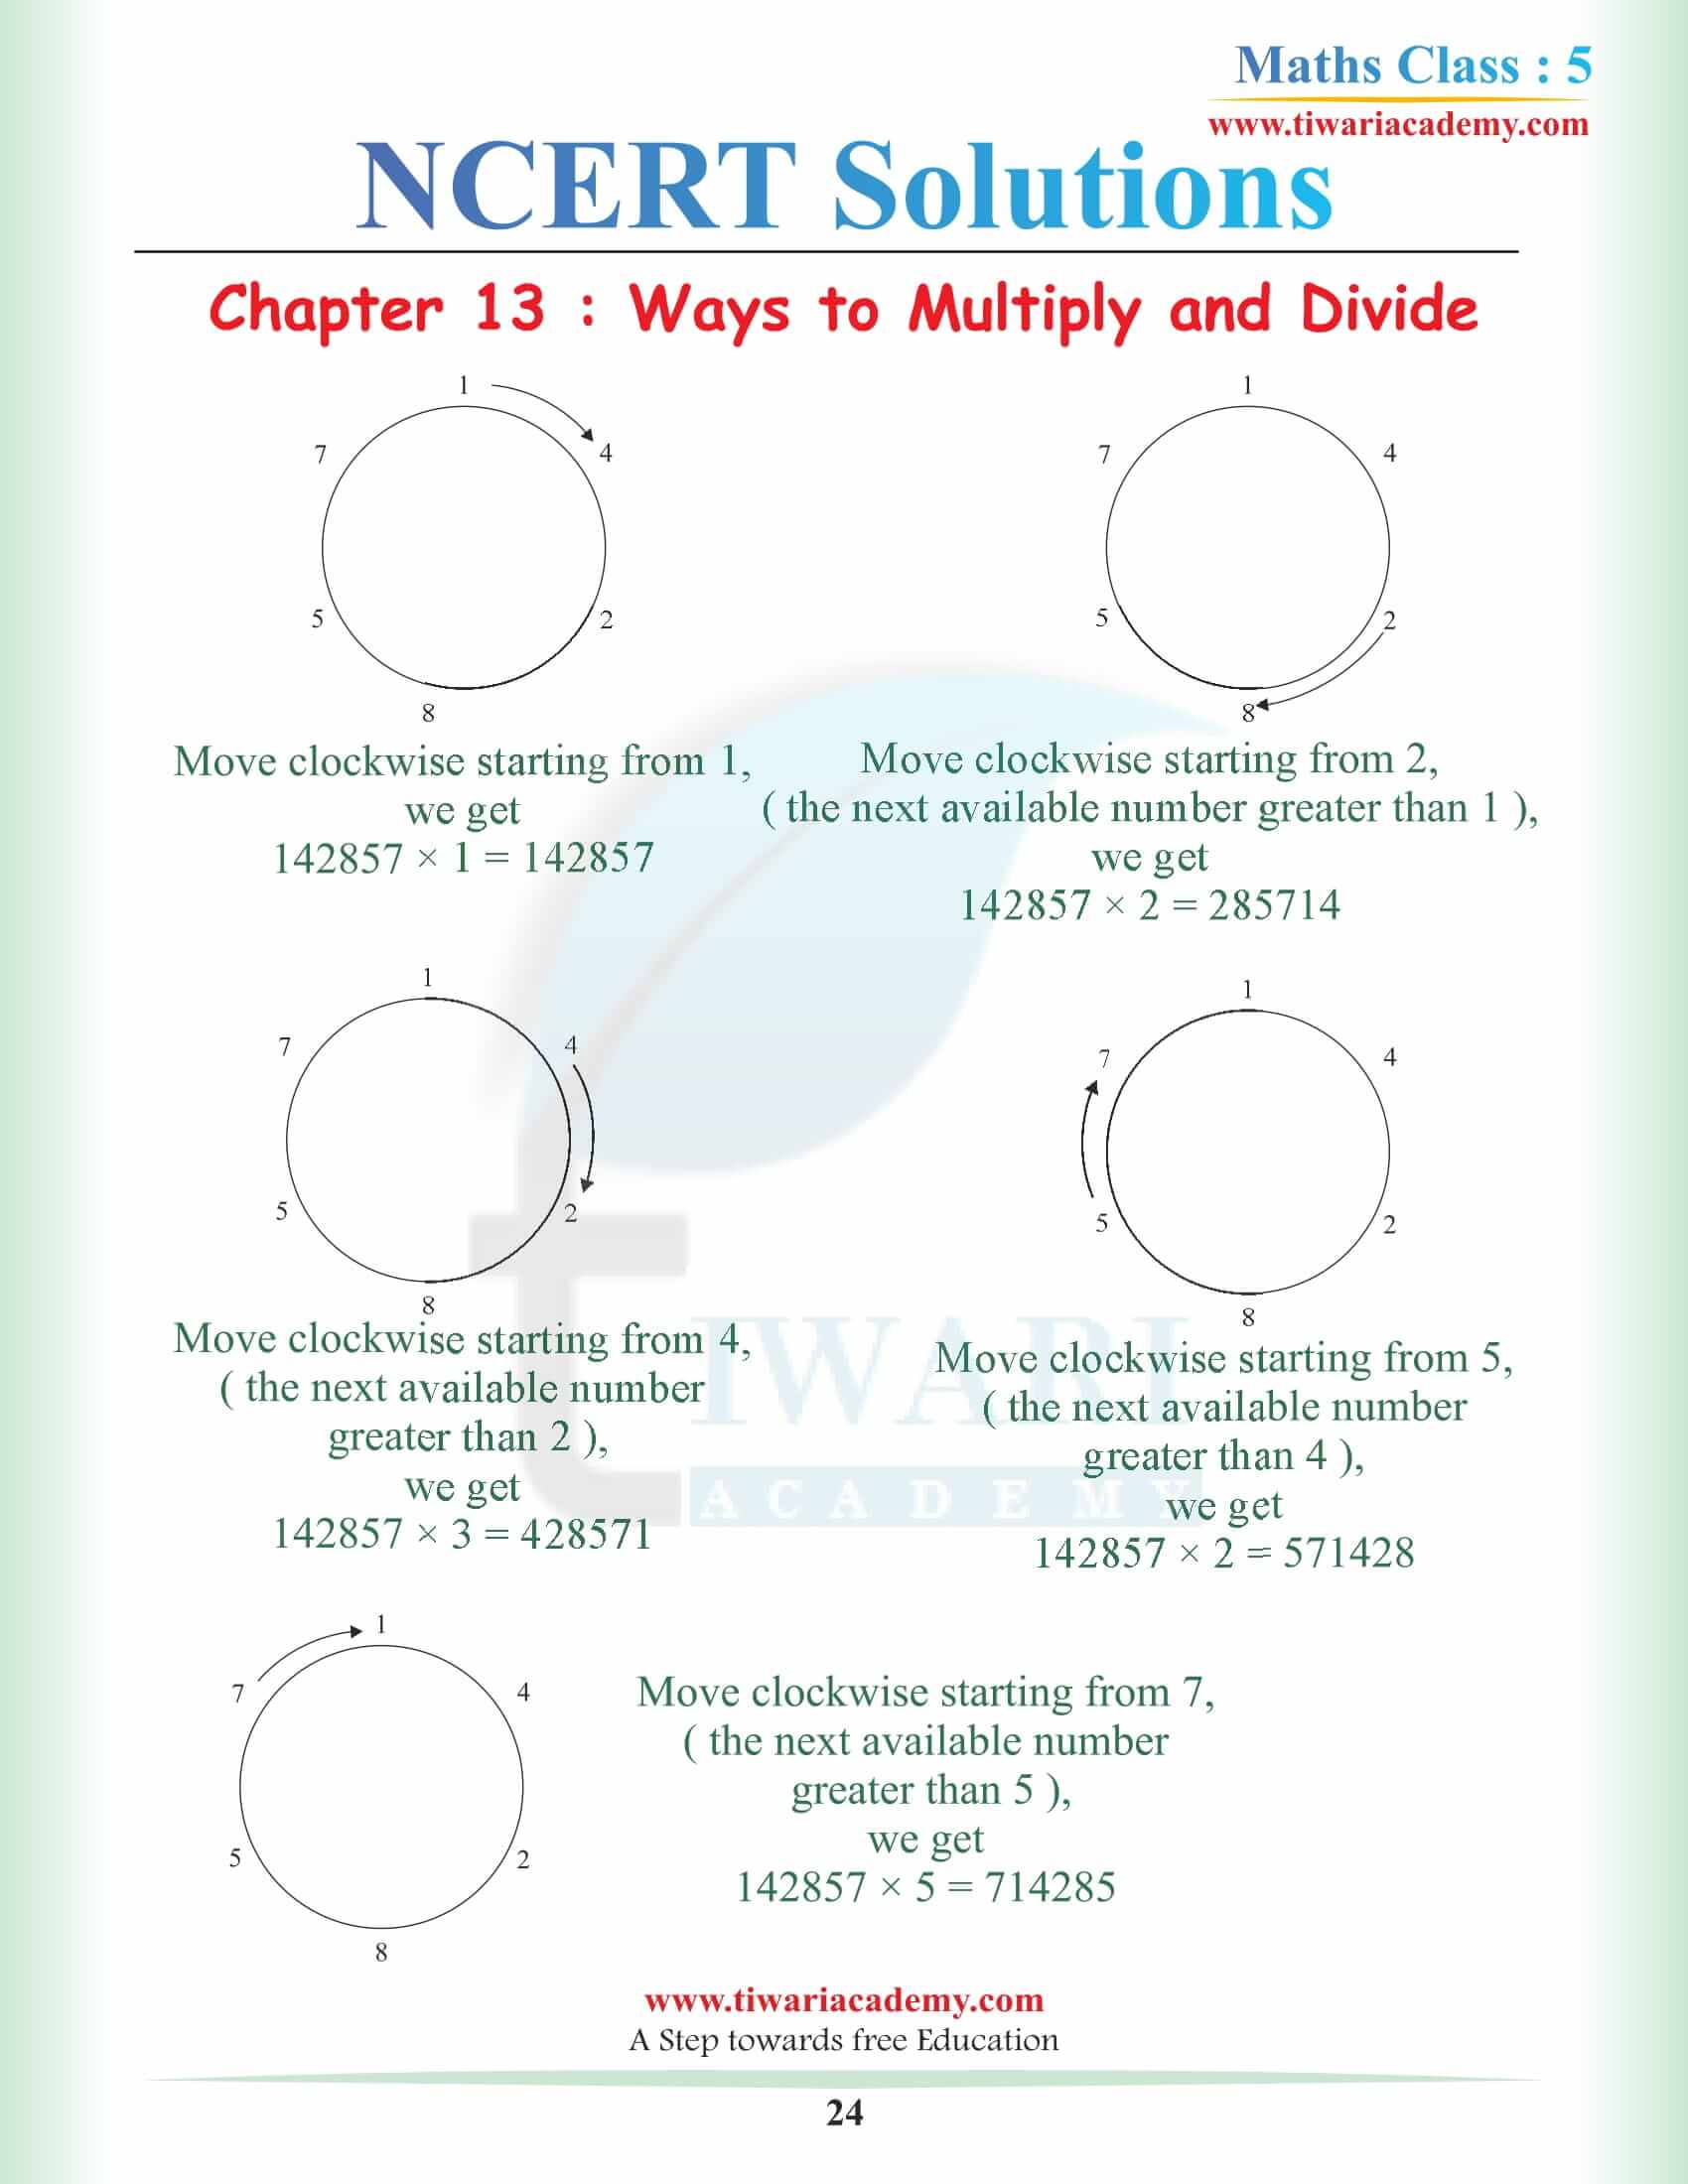 5th Maths Chapter 13 NCERT Solutions in PDF file